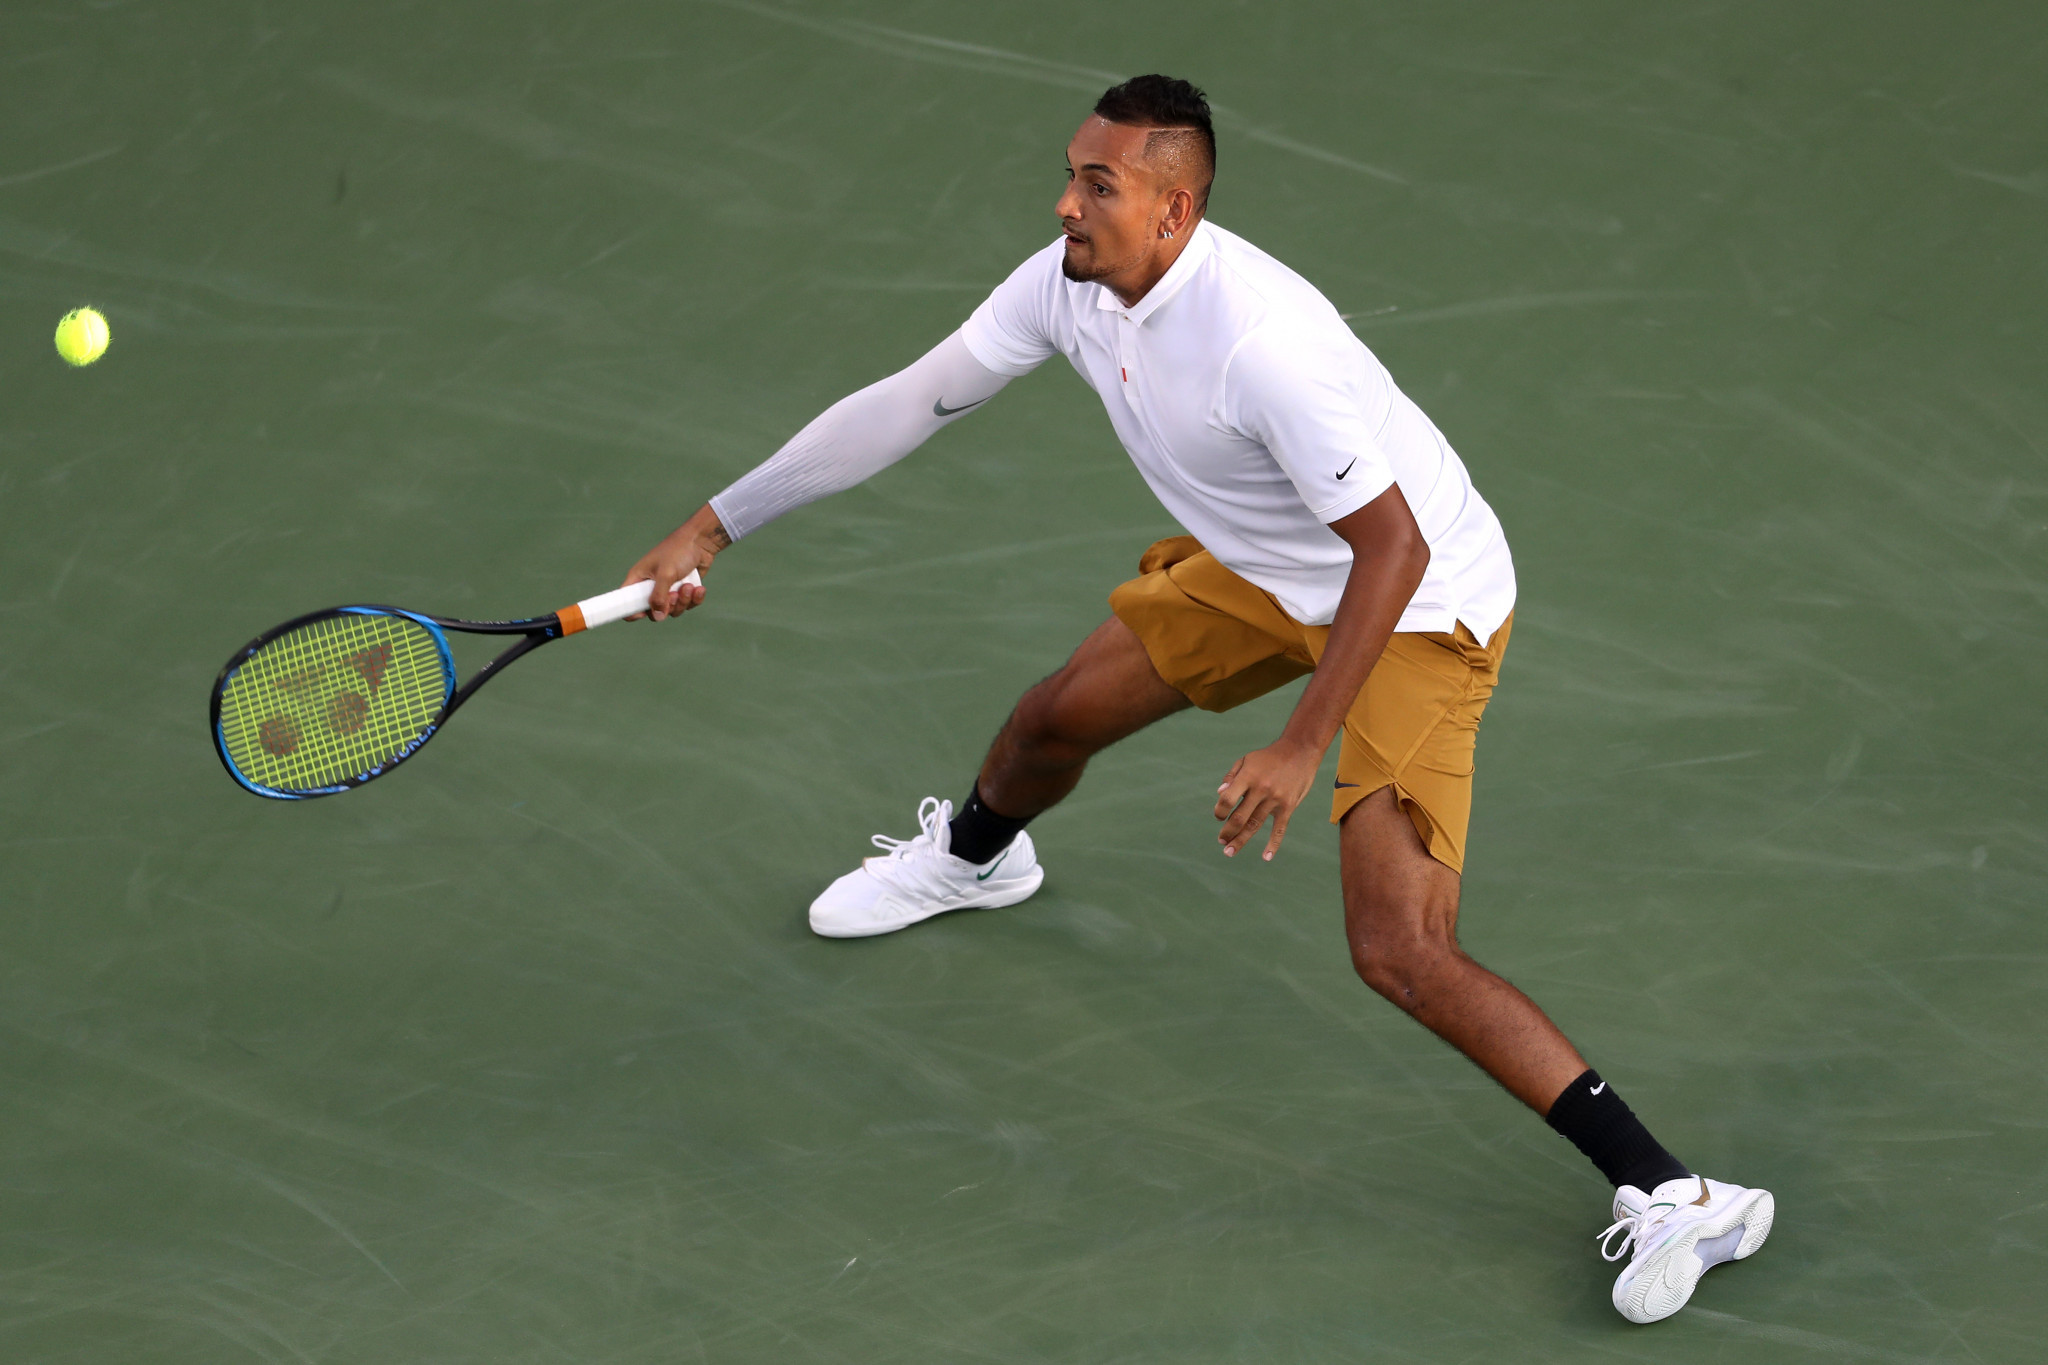 Kyrgios facing more punishment from ATP after latest meltdown at Cincinnati Masters